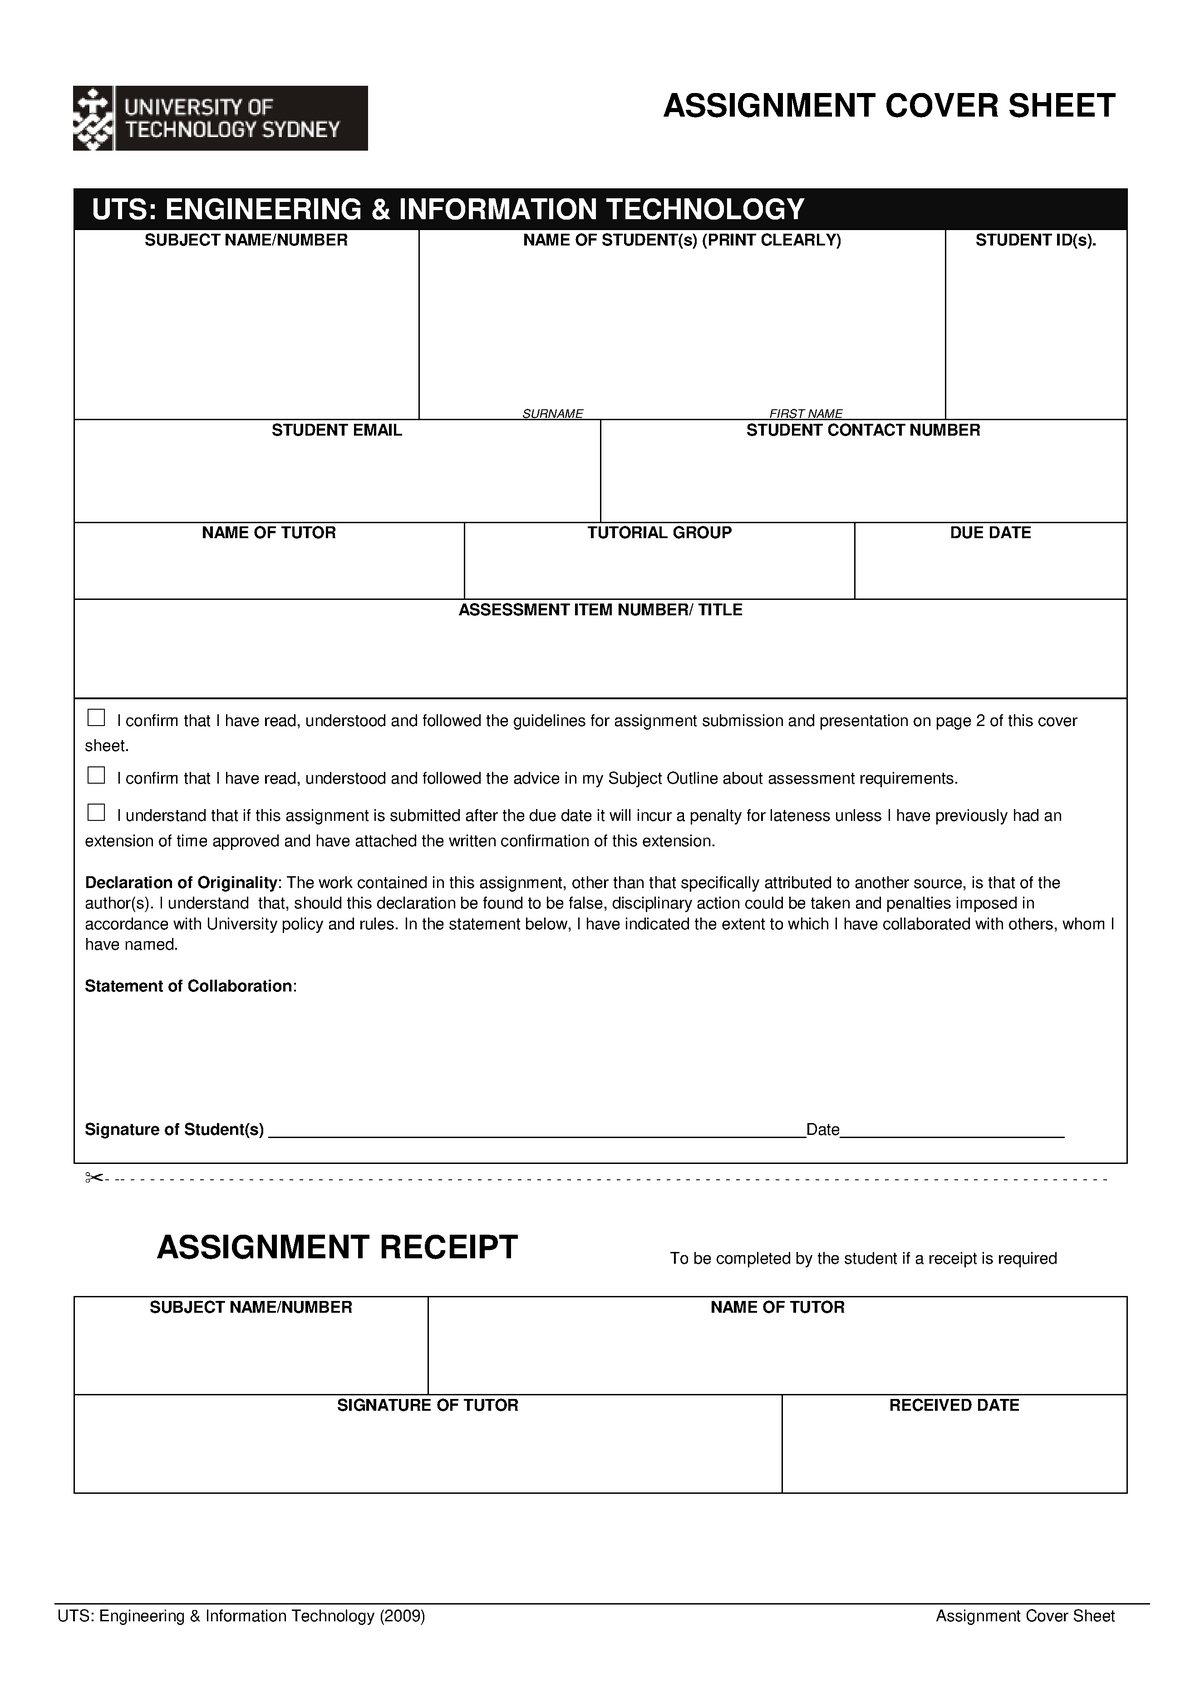 monash group assignment cover sheet